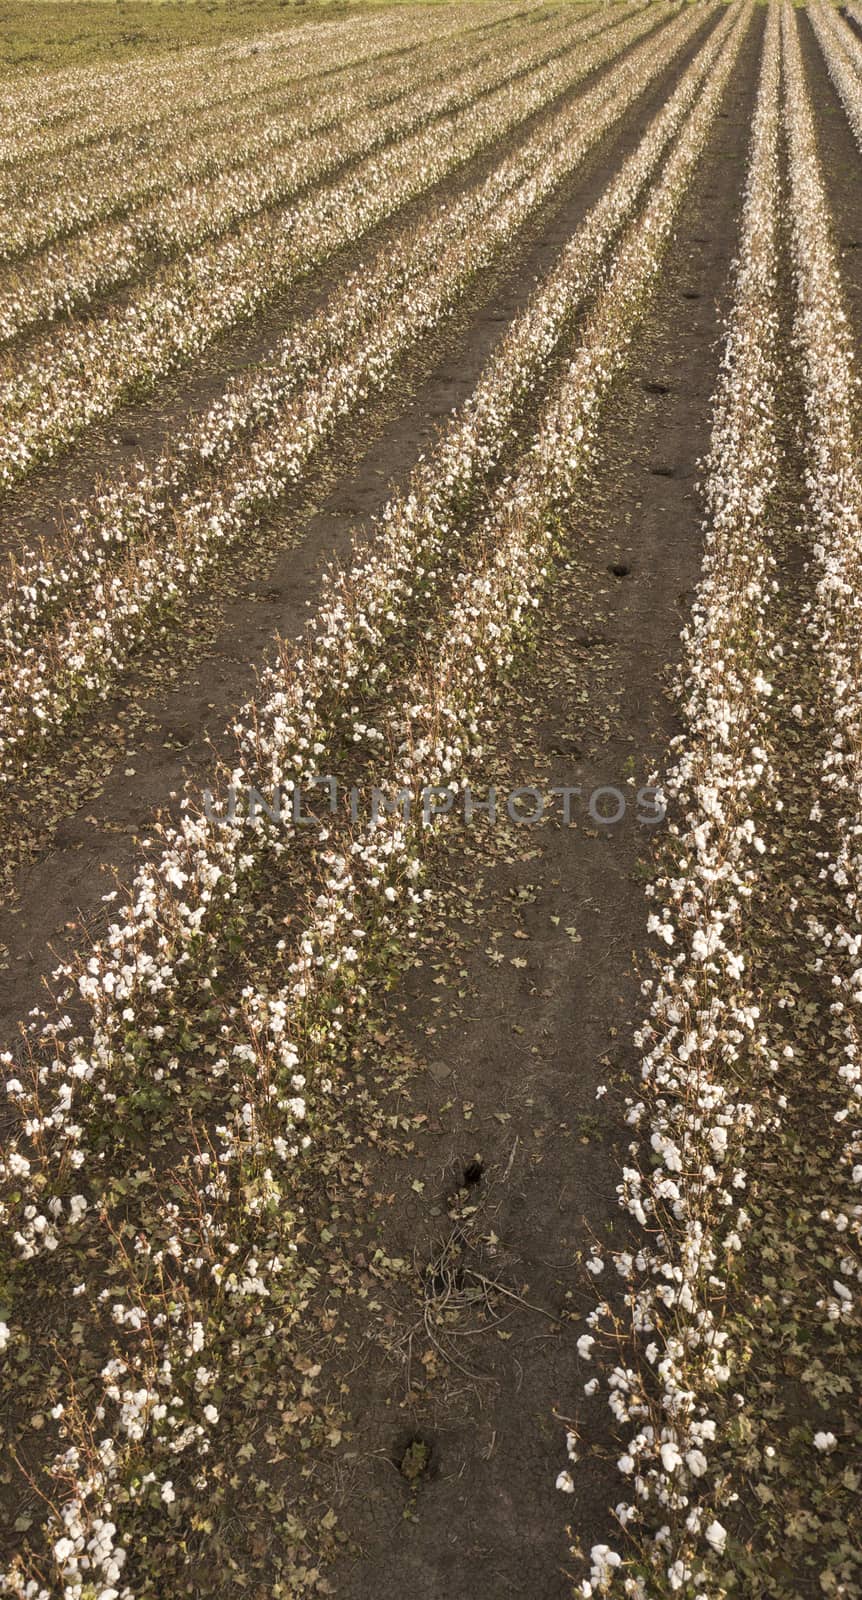 Field of cotton in the countryside ready for harvesting.